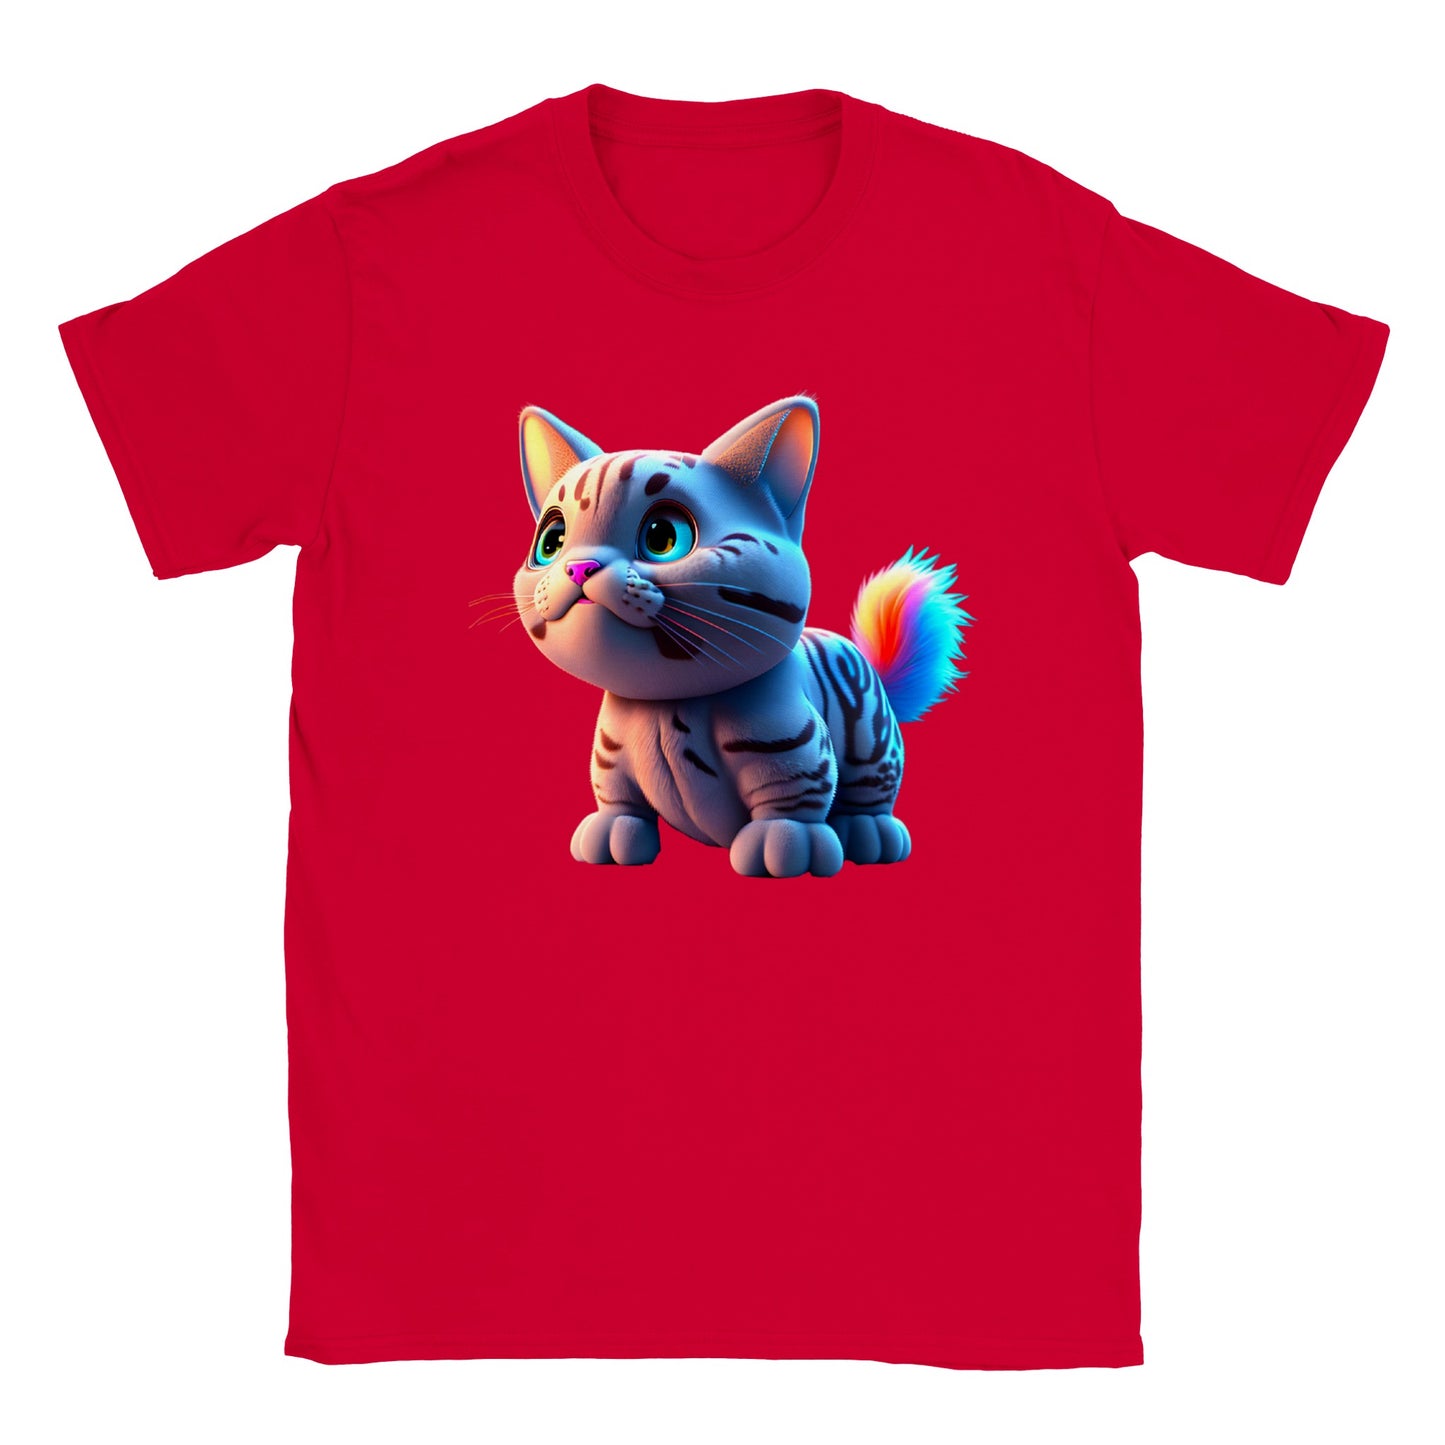 Adorable, Cool, Cute Cats and Kittens Toy - Classic Kids Crewneck T-Shirt 38